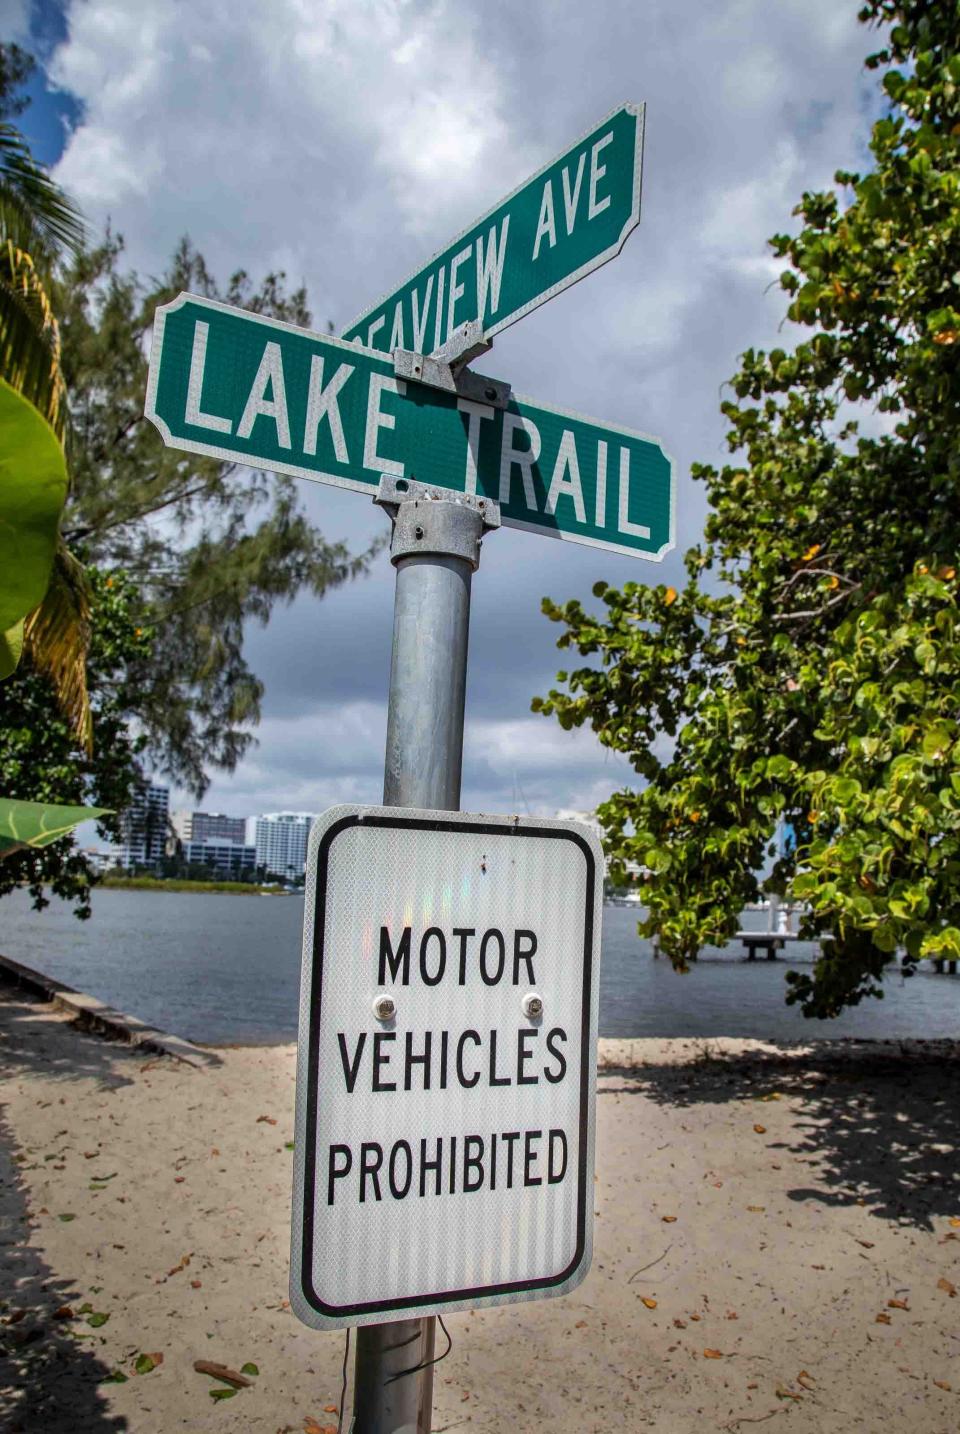 A sign on the Lake Trail states motor vehicles are prohibited.